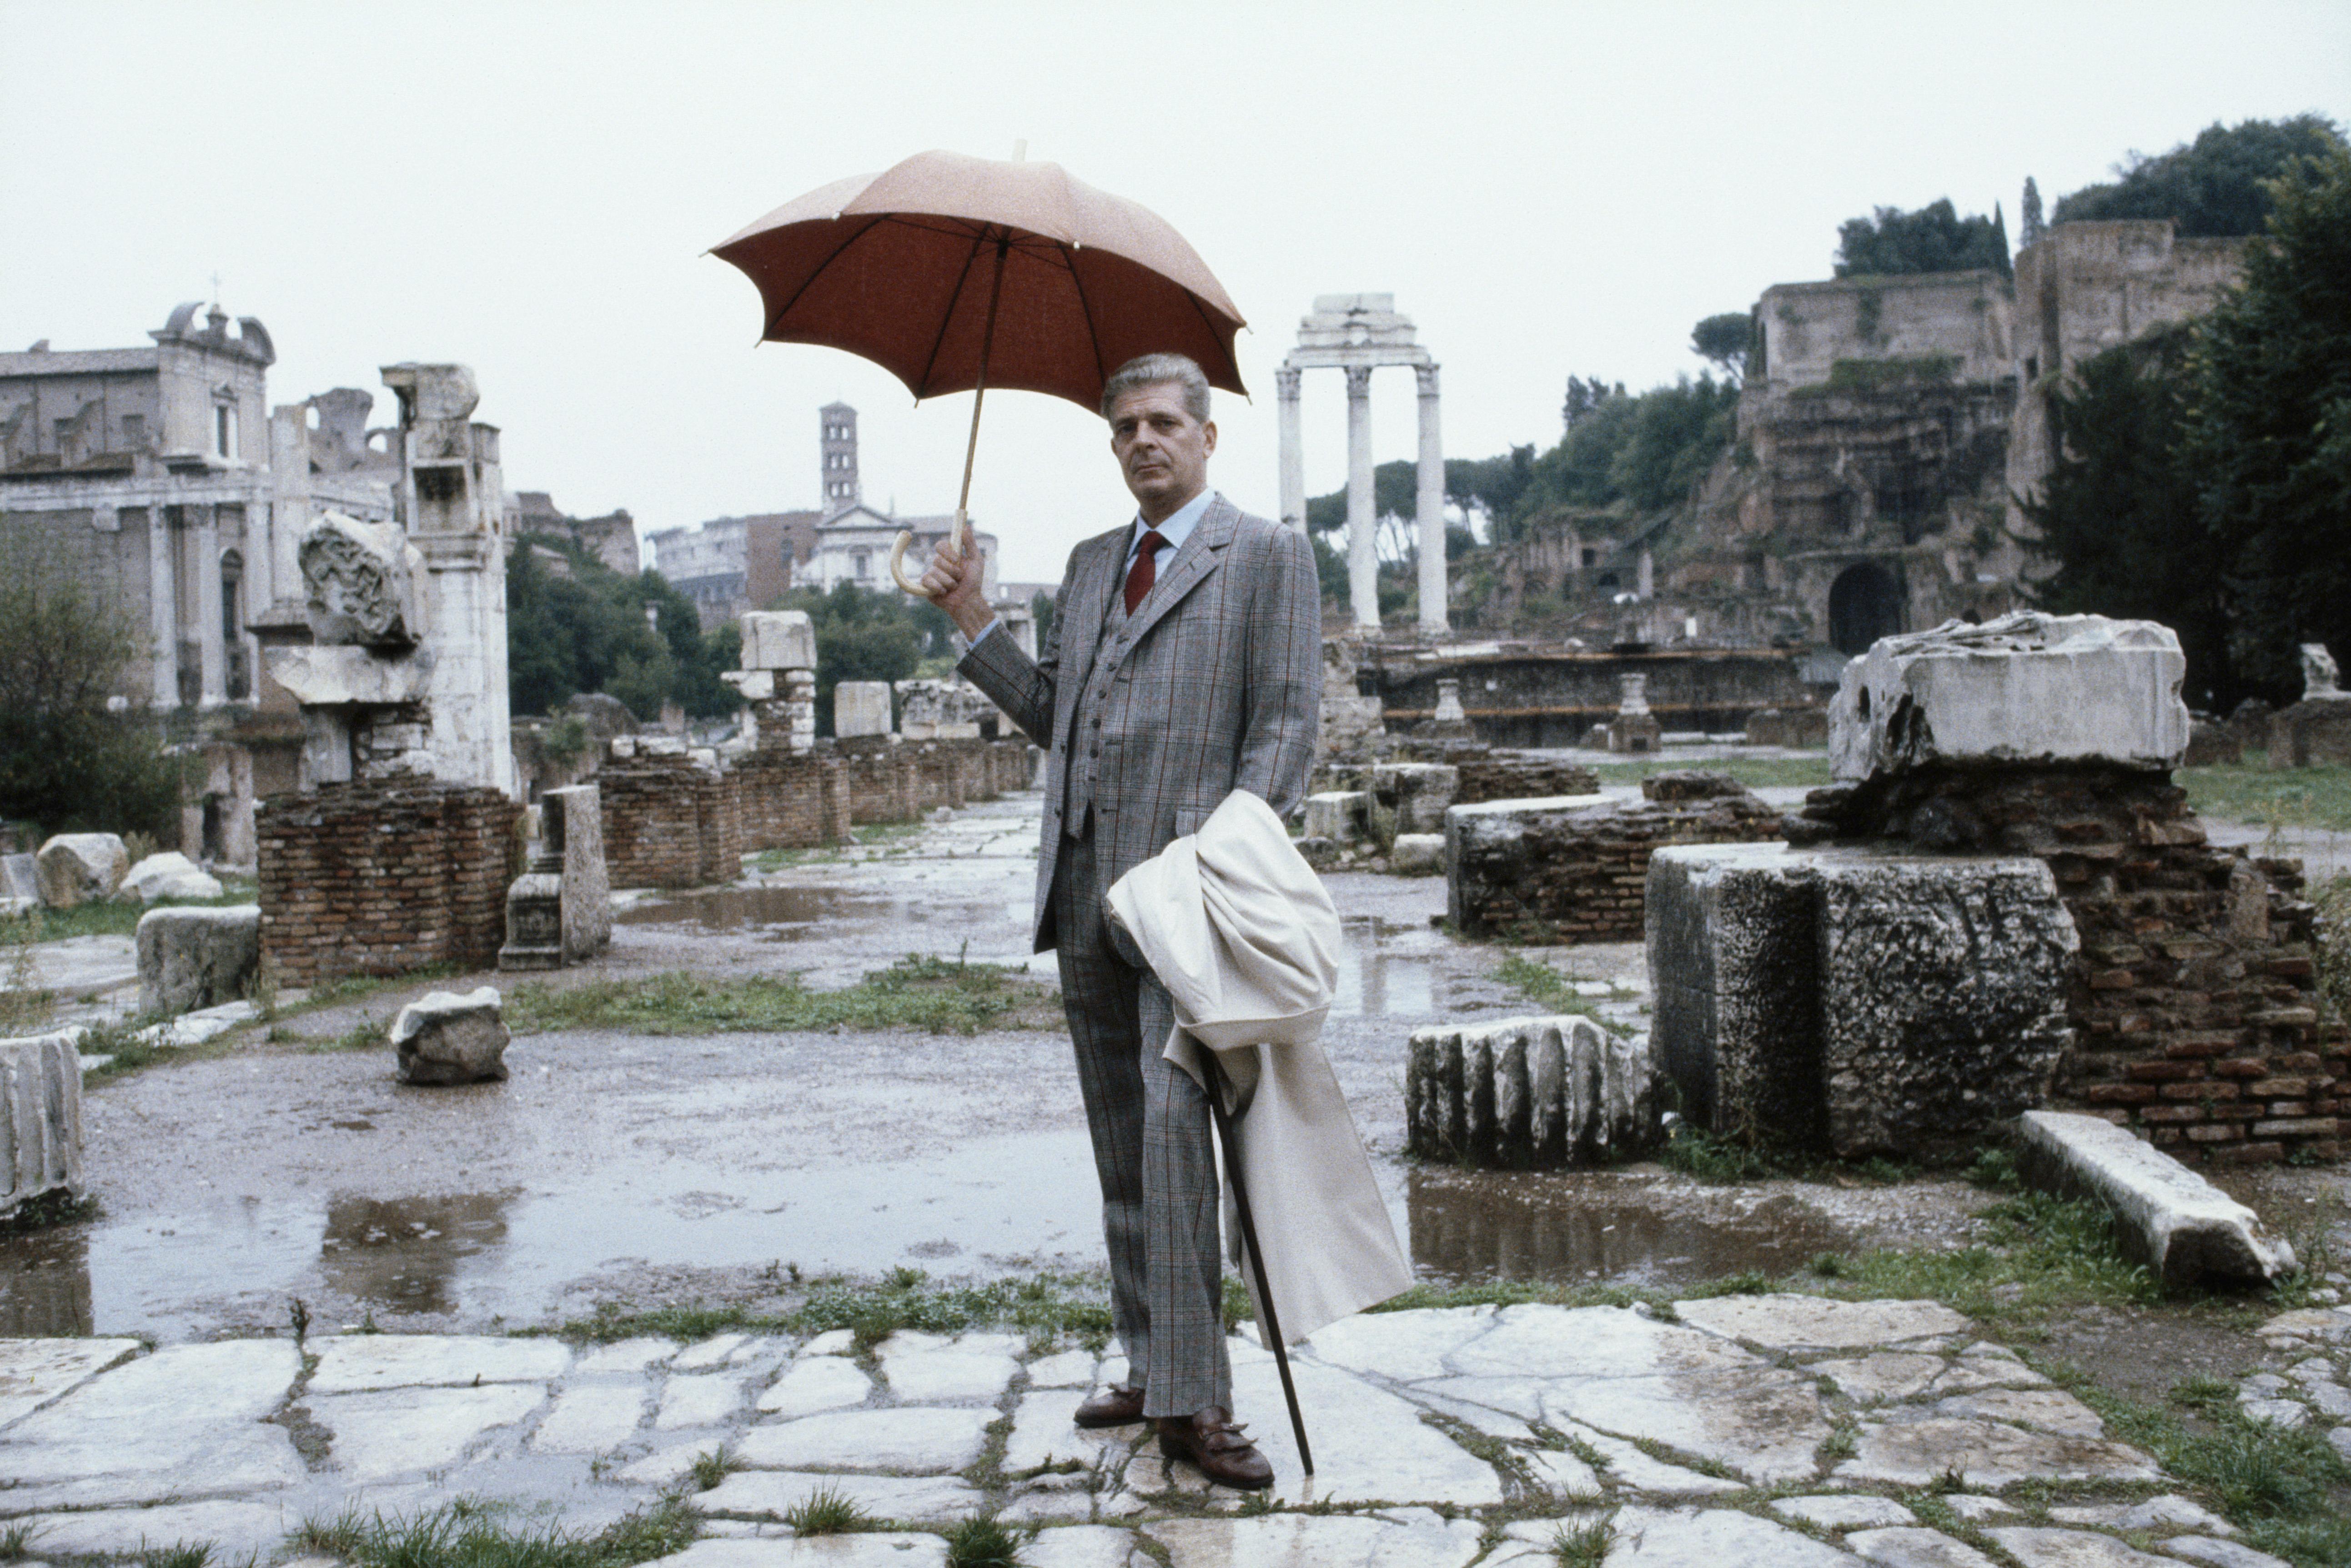 Slim Aarons
Prince Torlonia
1984
Chromogenic Lambda Print
Estate stamped and hand numbered edition of 150 with certificate of authenticity from the estate. 

Prince Torlonia, sheltering beneath an umbrella, poses in the Roman Forum in Rome, Italy,